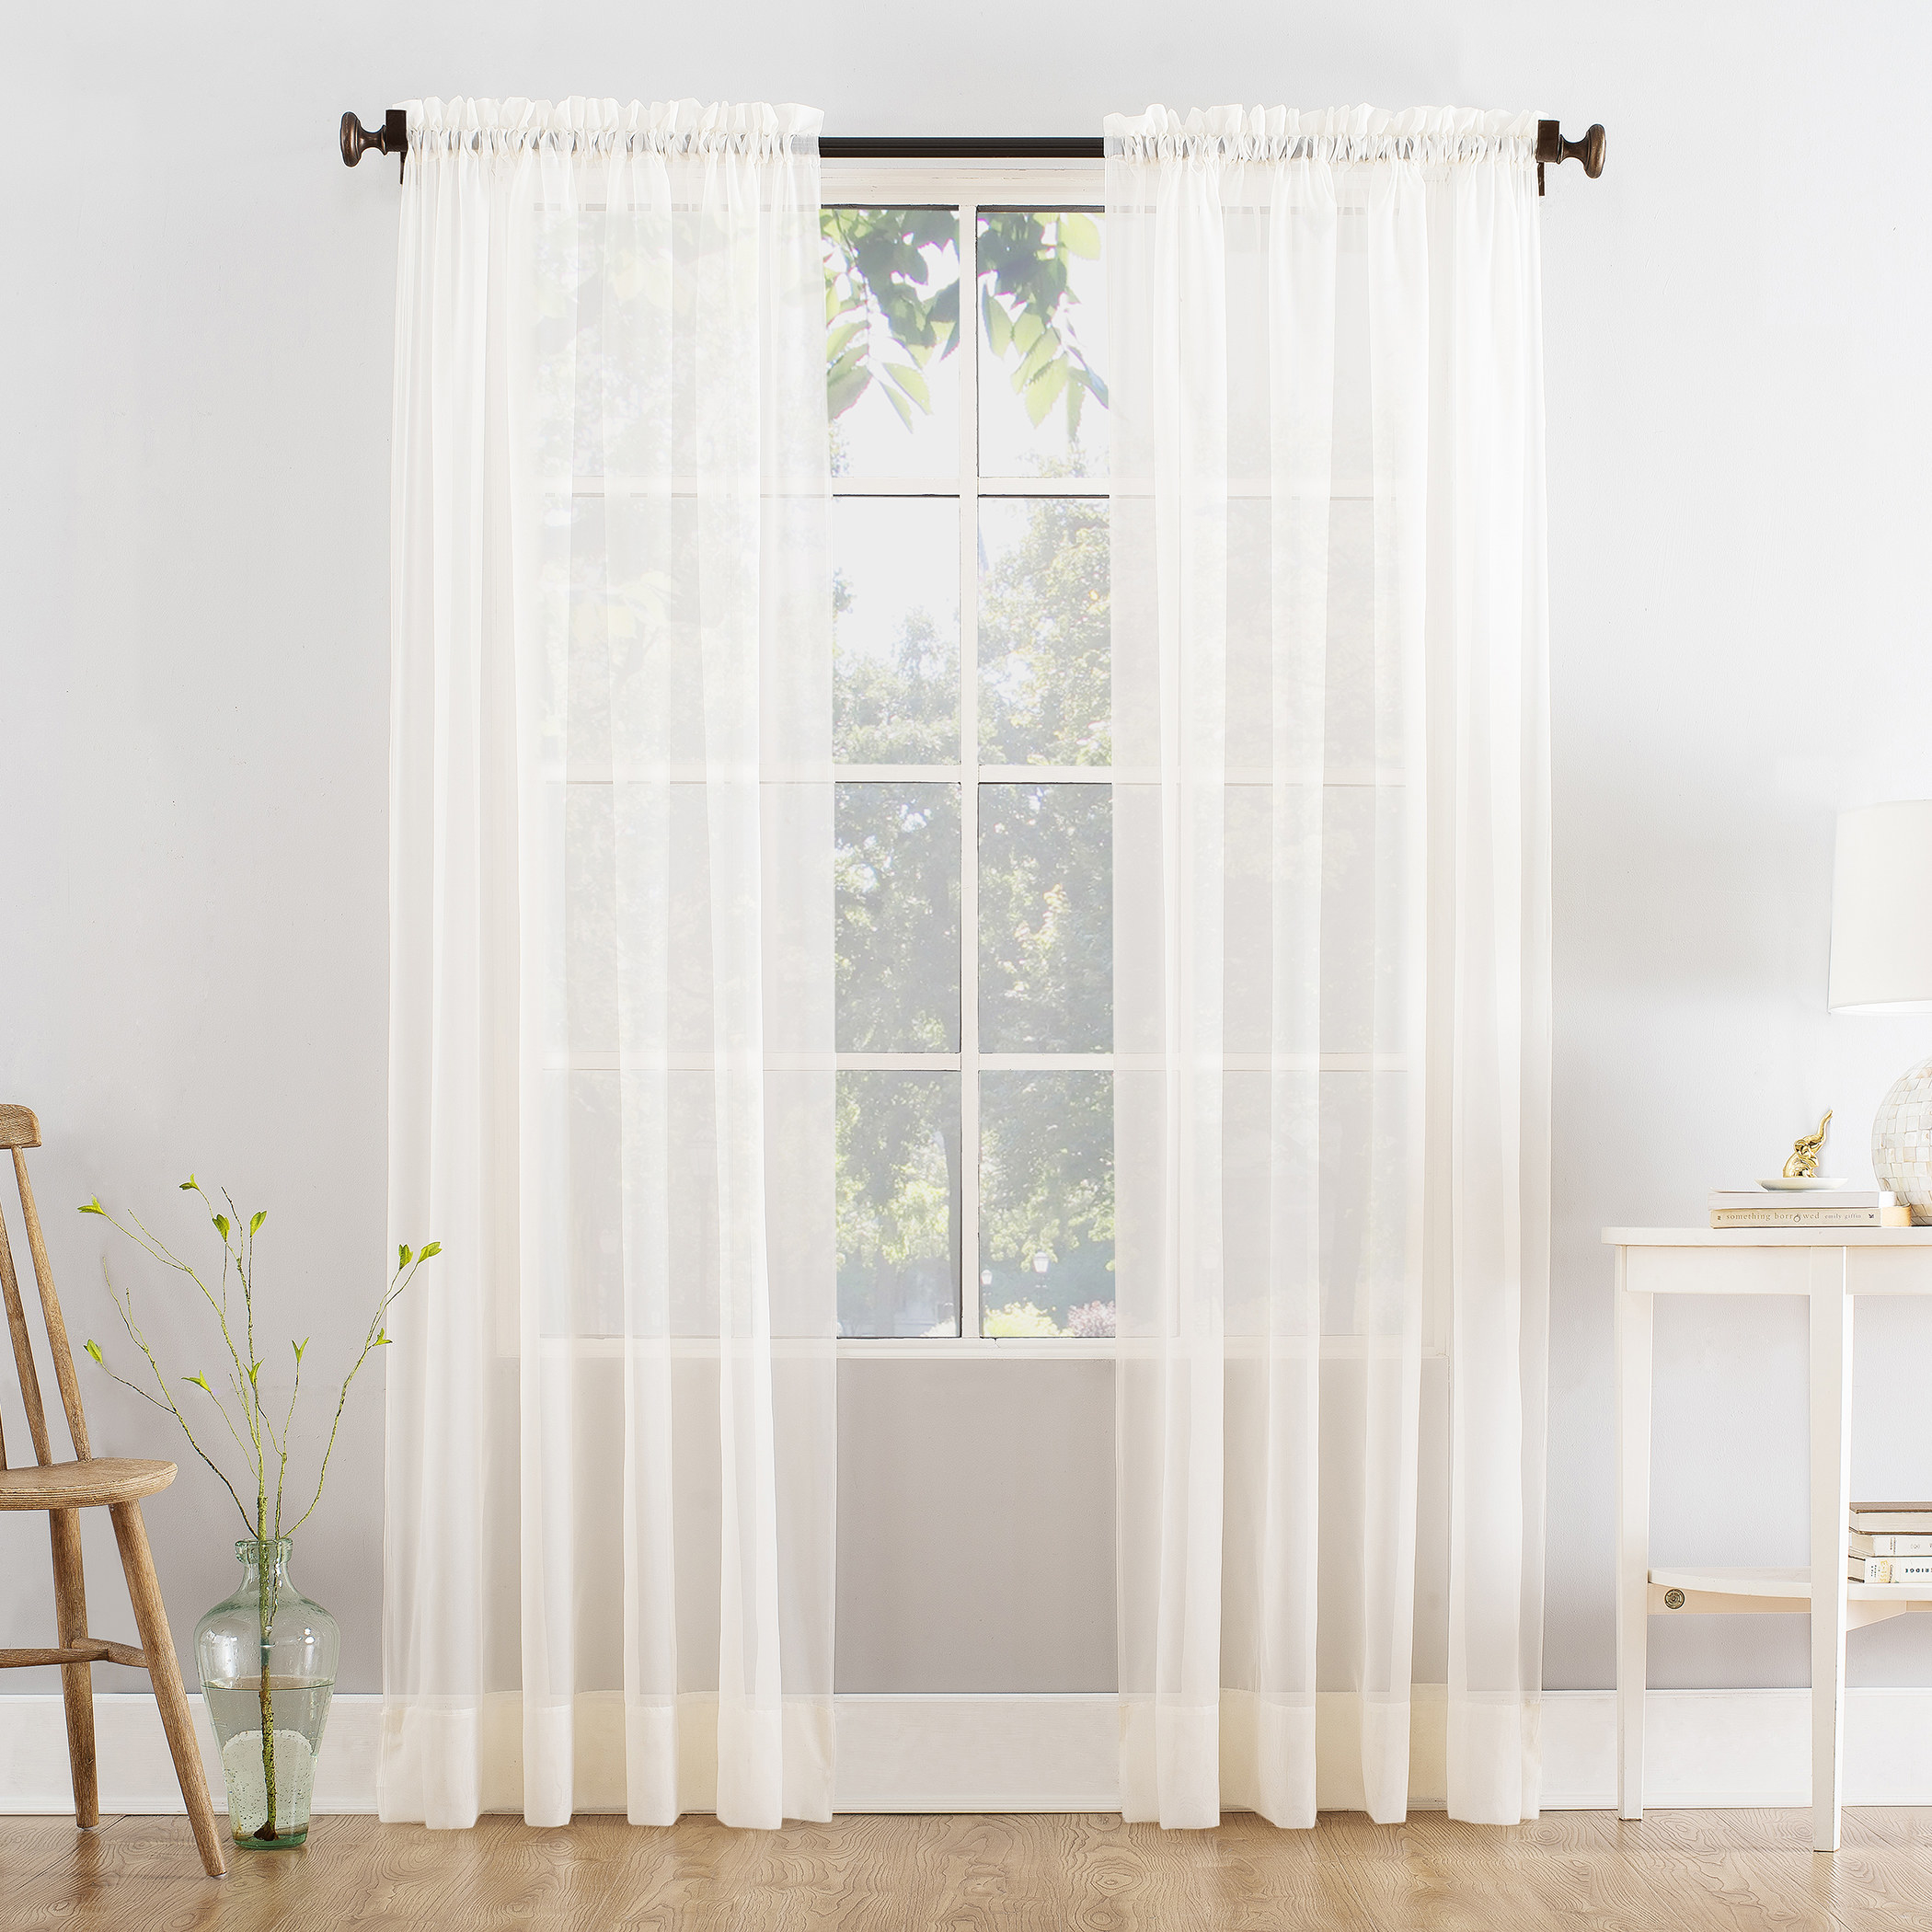 The curtains in the color Ivory